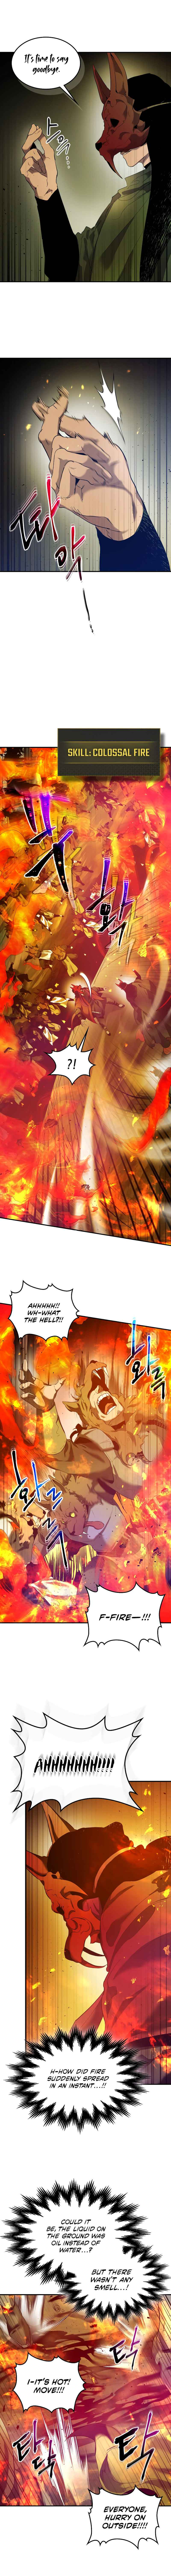 Leveling With The Gods Chapter 26, Leveling With The Gods 26, Read Leveling With The Gods Chapter 26, Leveling With The Gods Chapter 26 Manga, Leveling With The Gods Chapter 26 english, Leveling With The Gods Chapter 26 raw manga, Leveling With The Gods Chapter 26 online, Leveling With The Gods Chapter 26 high quality, Leveling With The Gods 26 chapter, Leveling With The Gods Chapter 26 manga scan